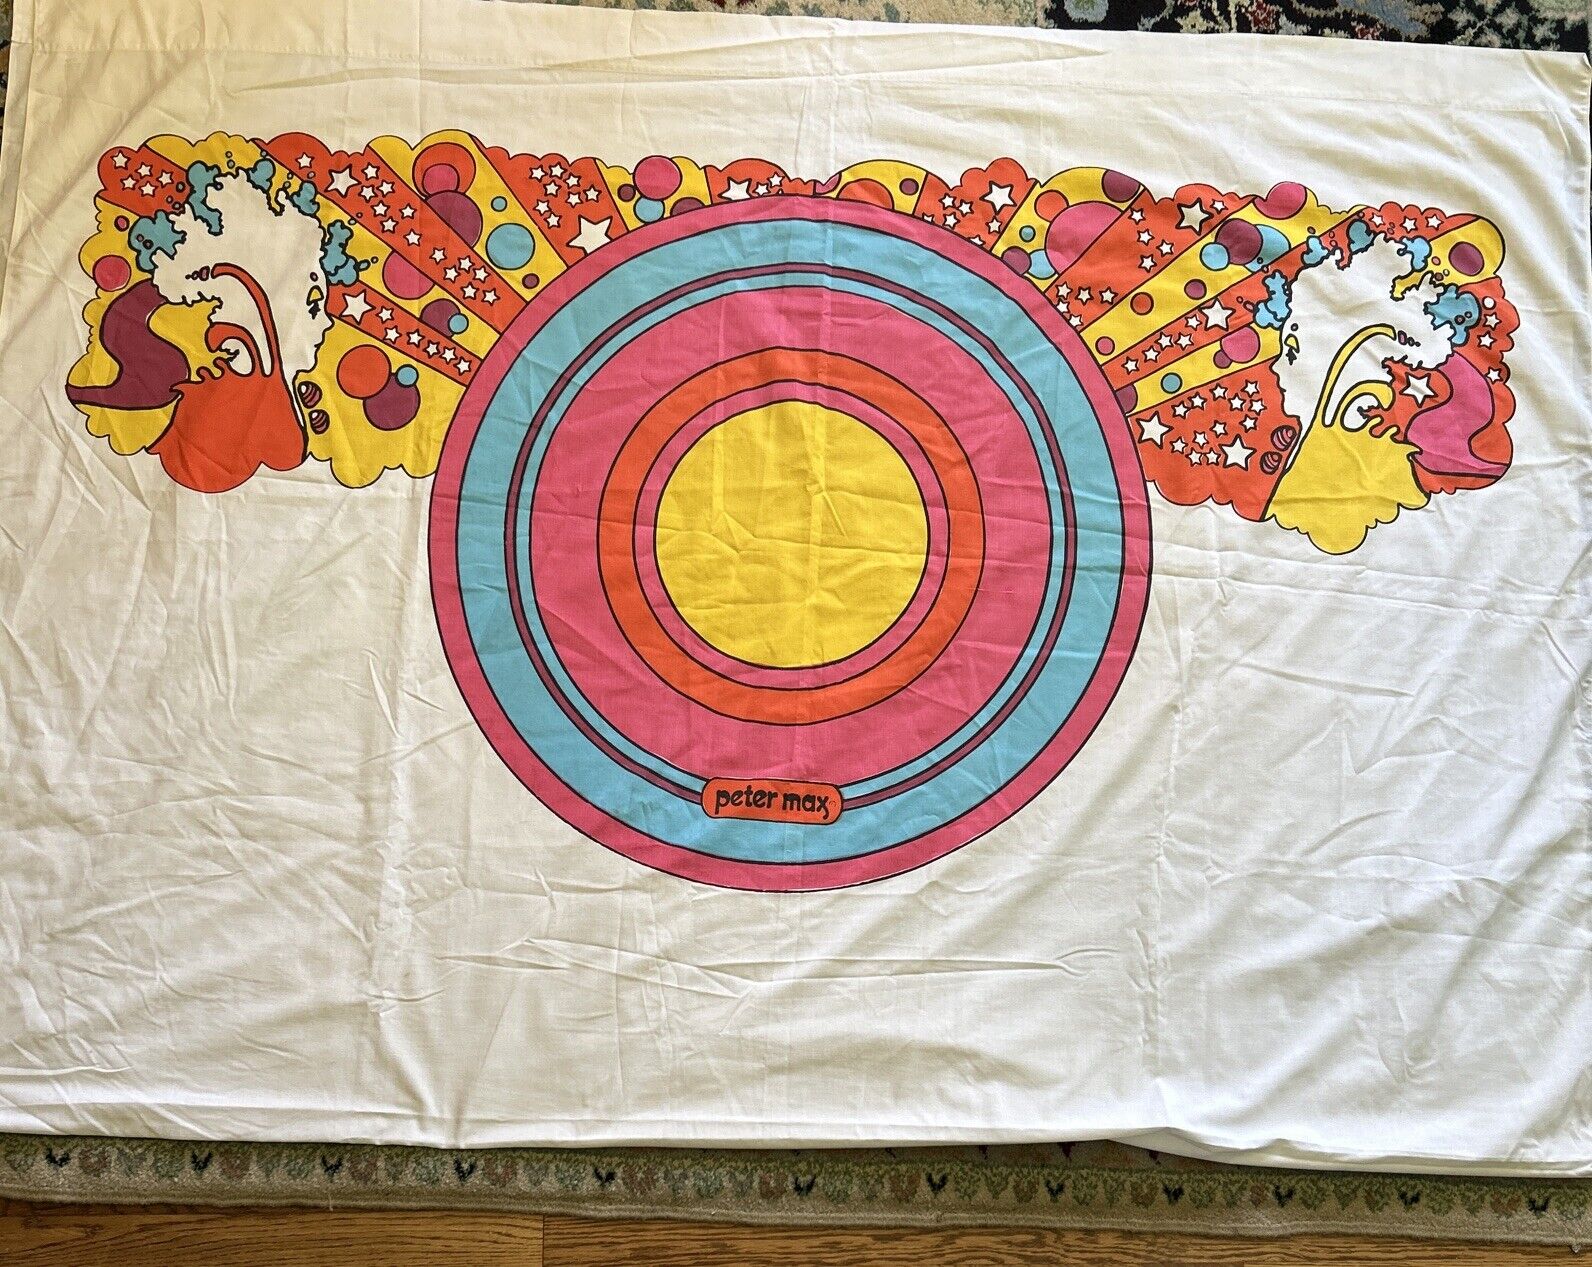 Vintage 1960-70’s PETER MAX Full Bed Sheet ‘Dream Weaver’ Mod Psychedelic Peace